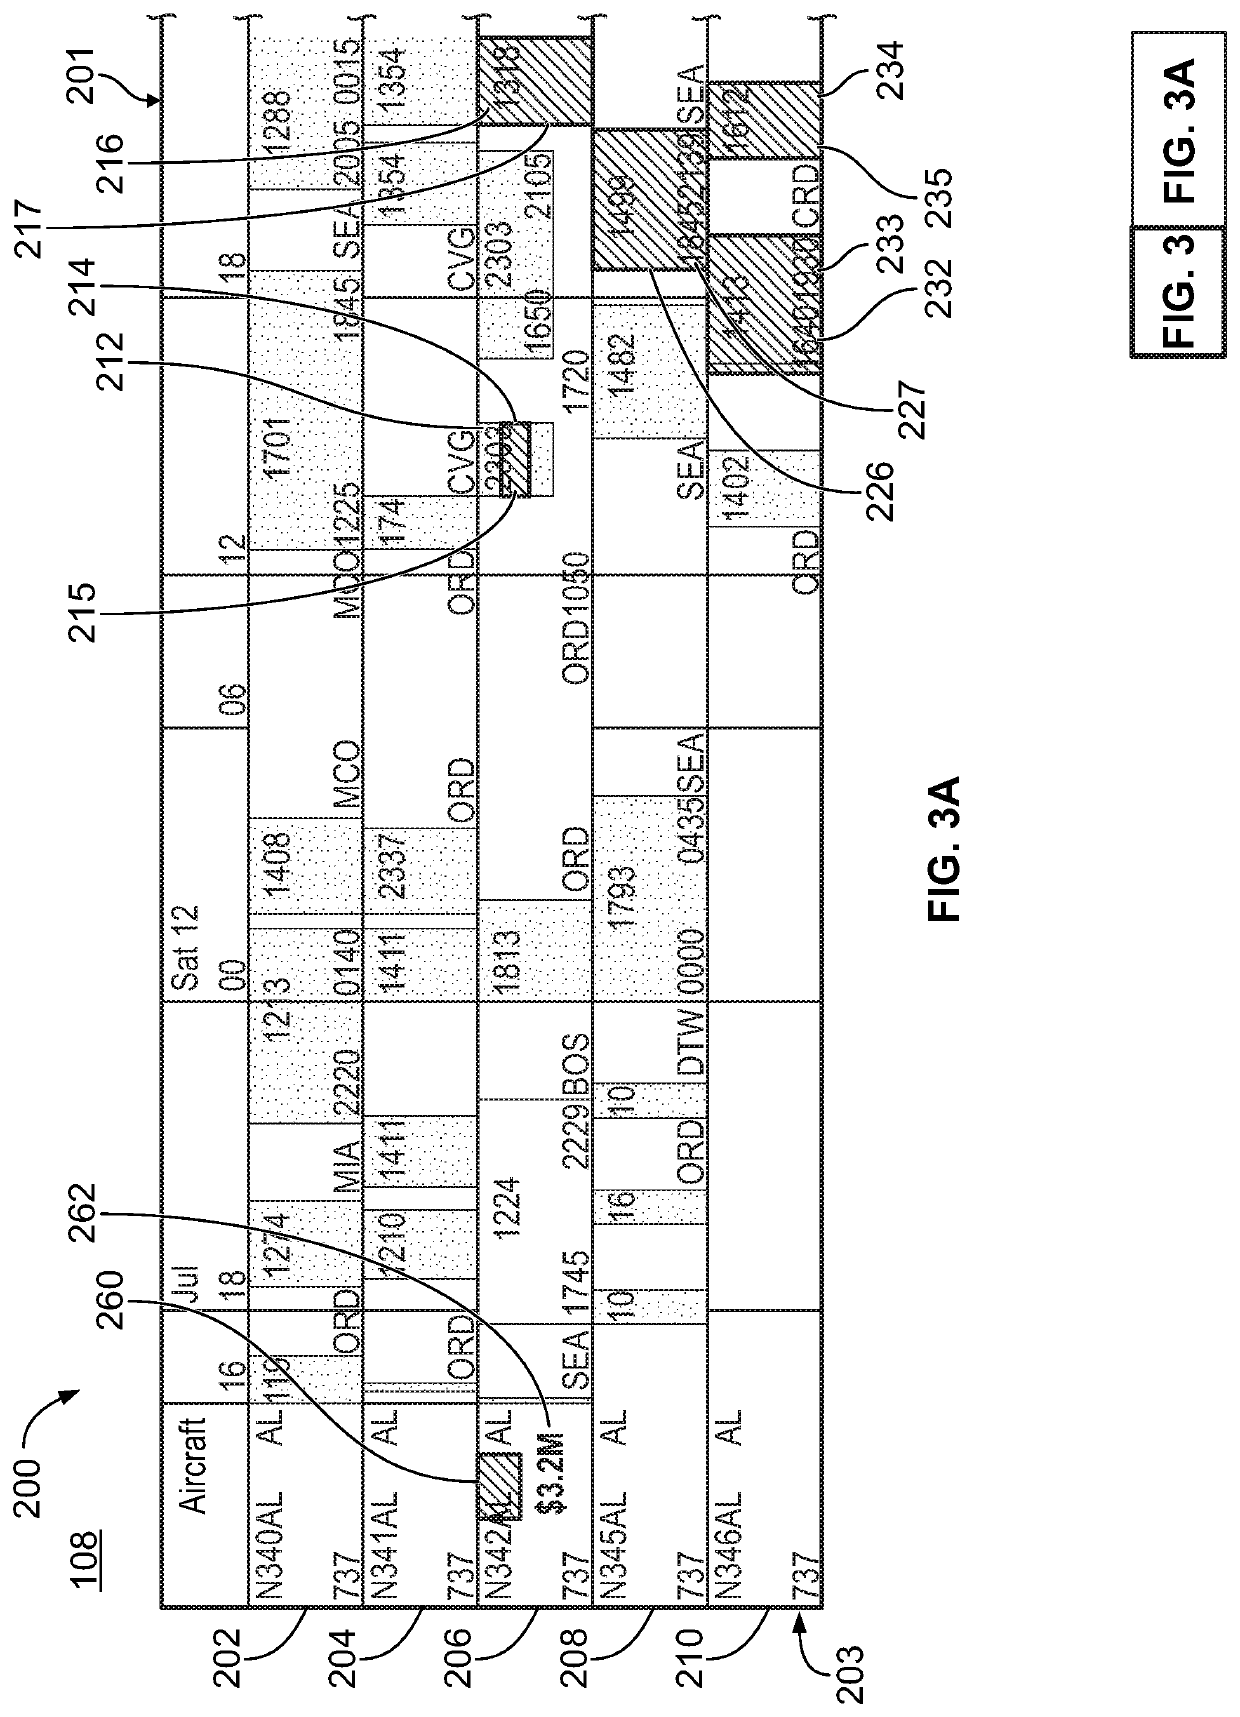 Flight schedule disruption awareness systems and methods